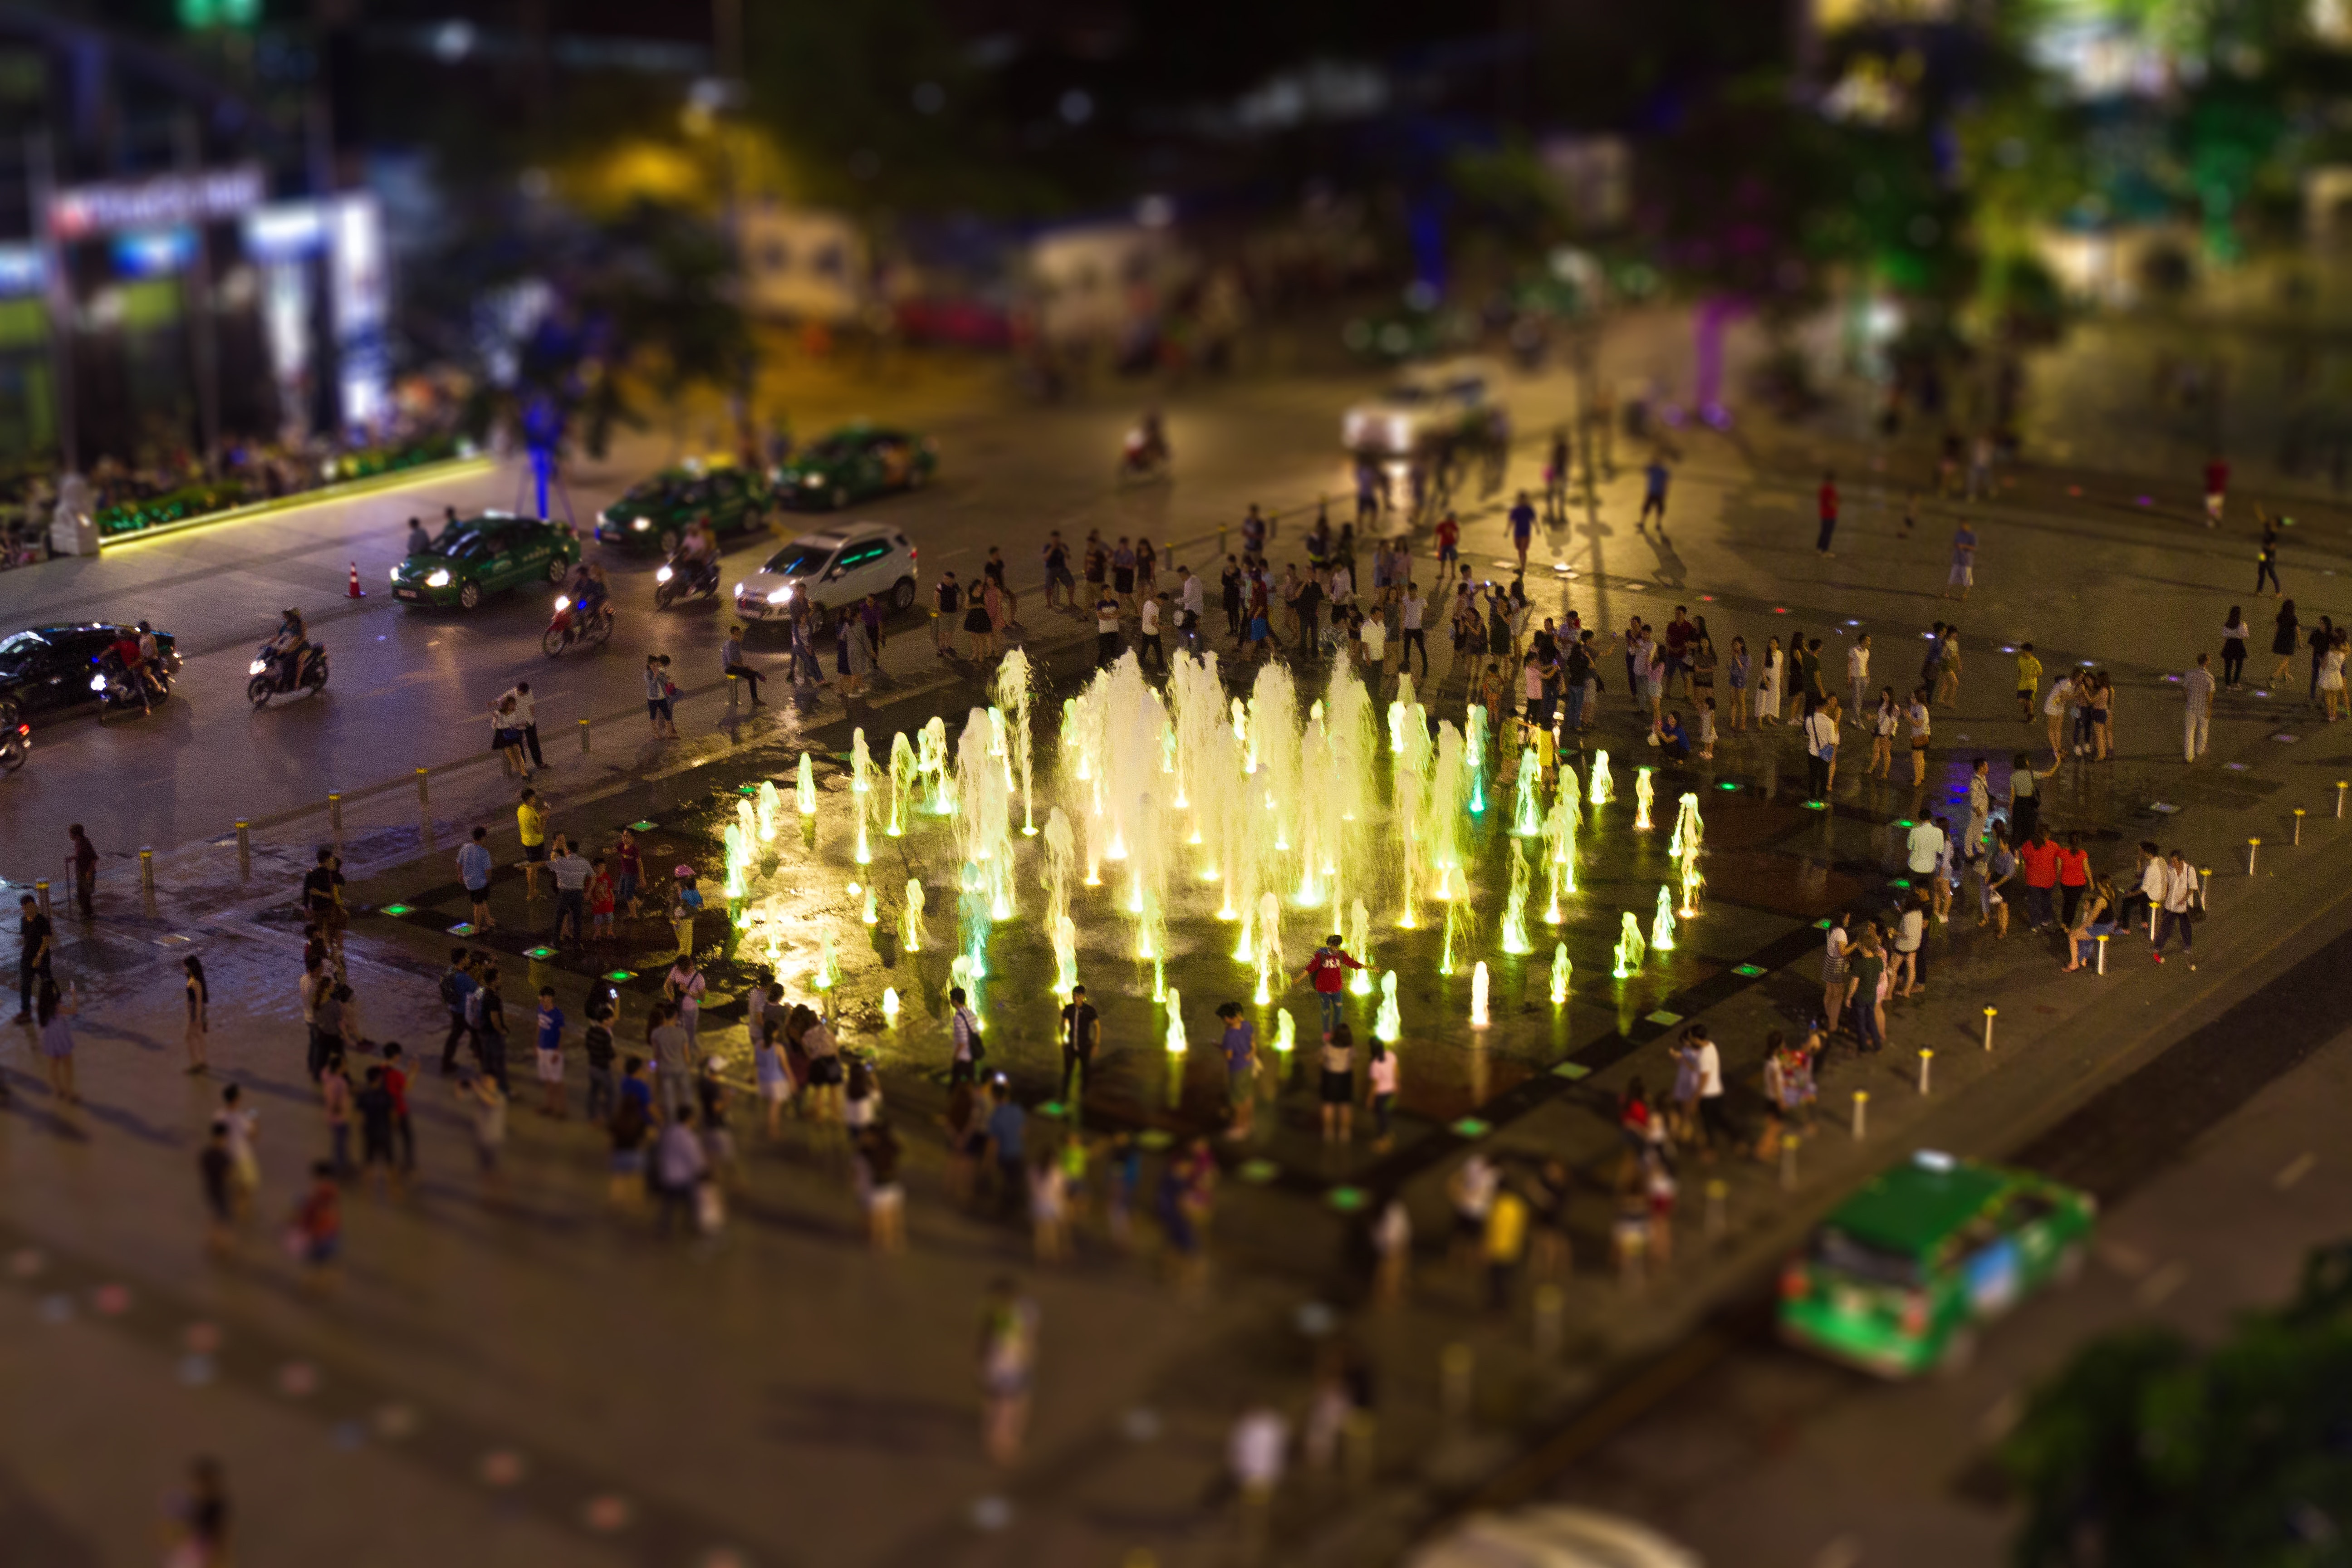 Fountain surrounded by people during nighttime photo